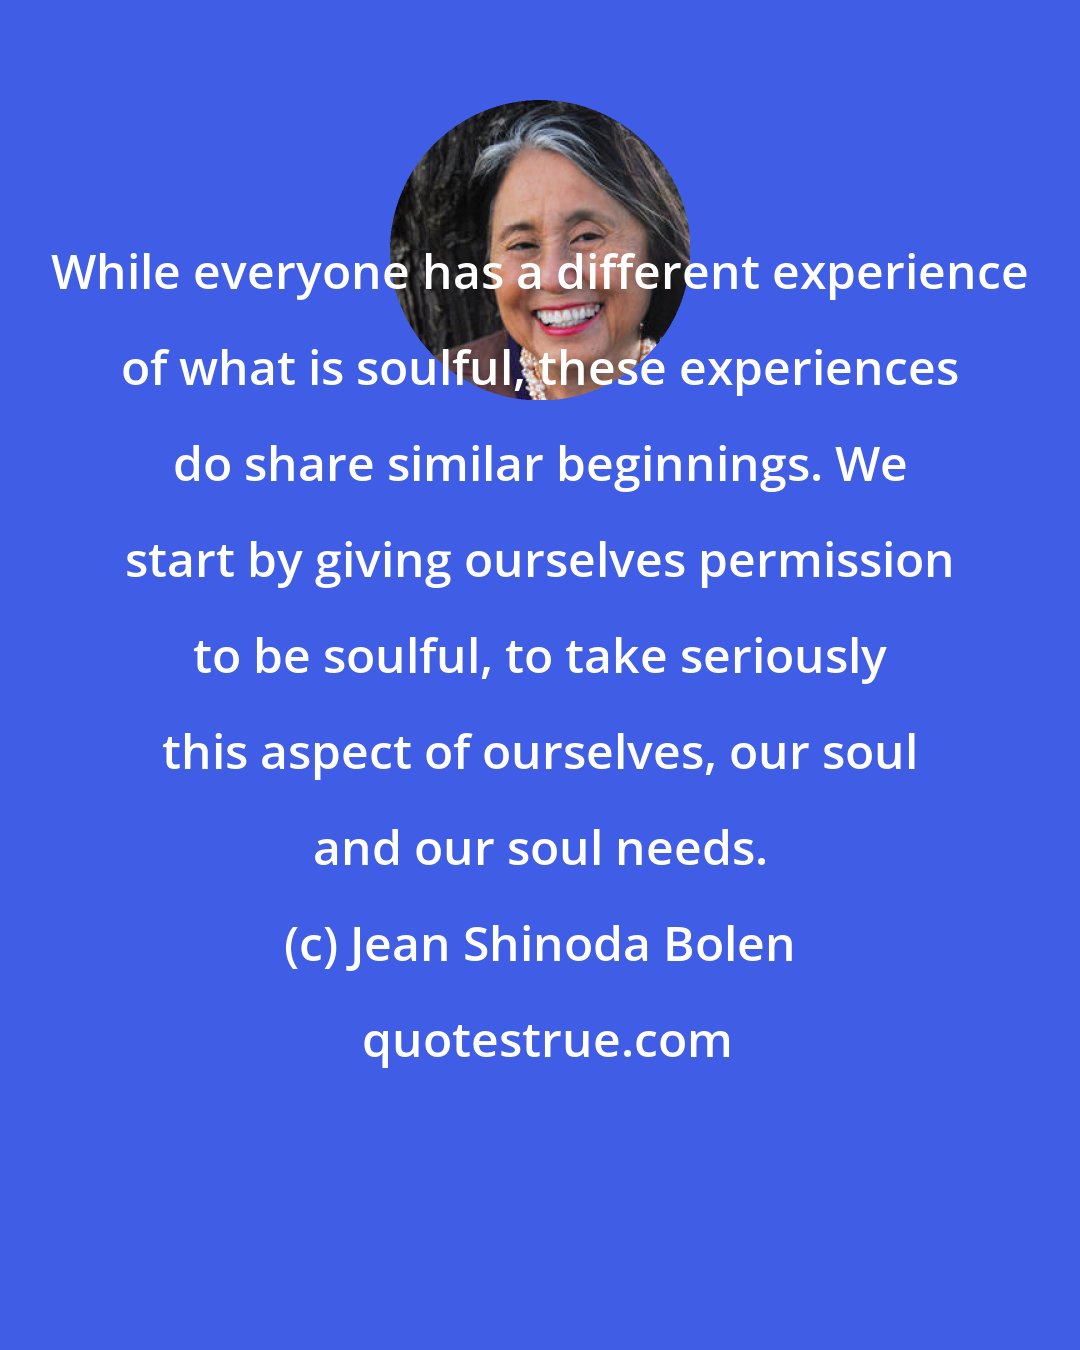 Jean Shinoda Bolen: While everyone has a different experience of what is soulful, these experiences do share similar beginnings. We start by giving ourselves permission to be soulful, to take seriously this aspect of ourselves, our soul and our soul needs.